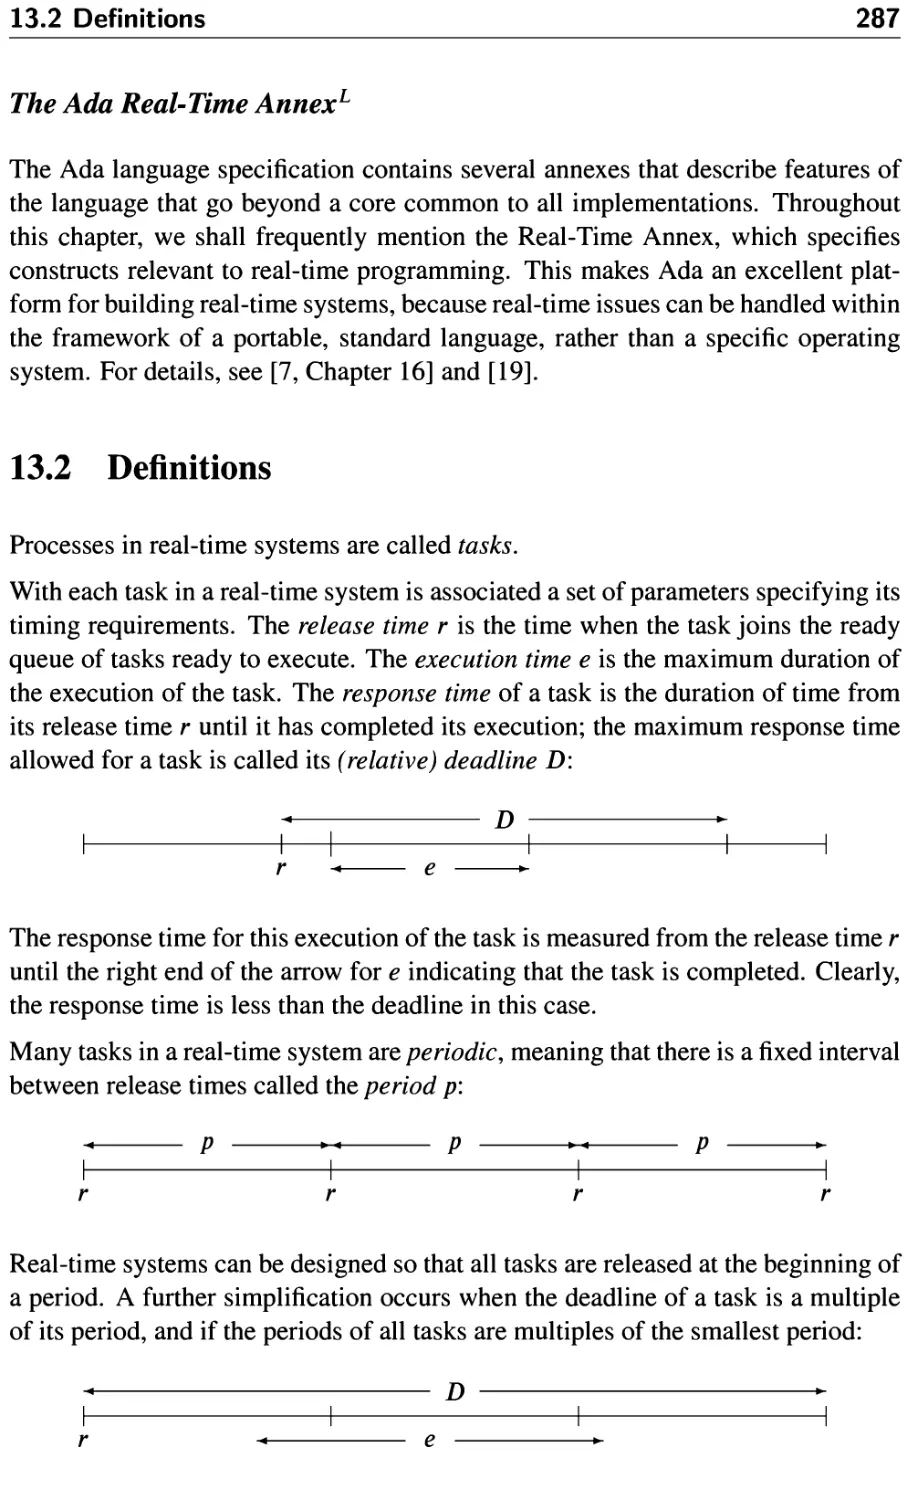 13.2 Definitions